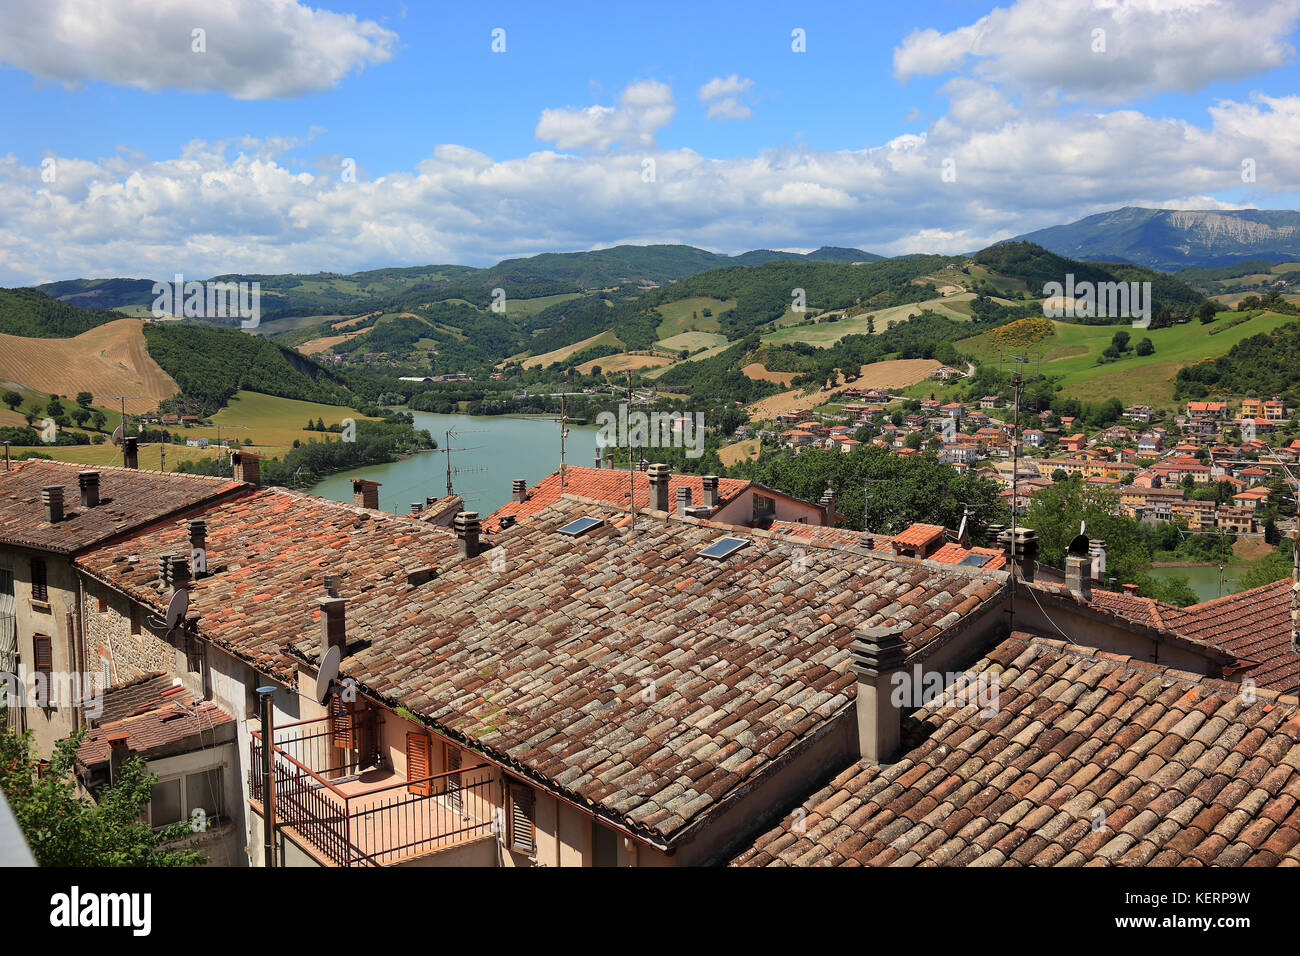 roofs of the old village of Sassocorvaro, with the view to Mercatale and river Foglia, Marche, Italy Stock Photo